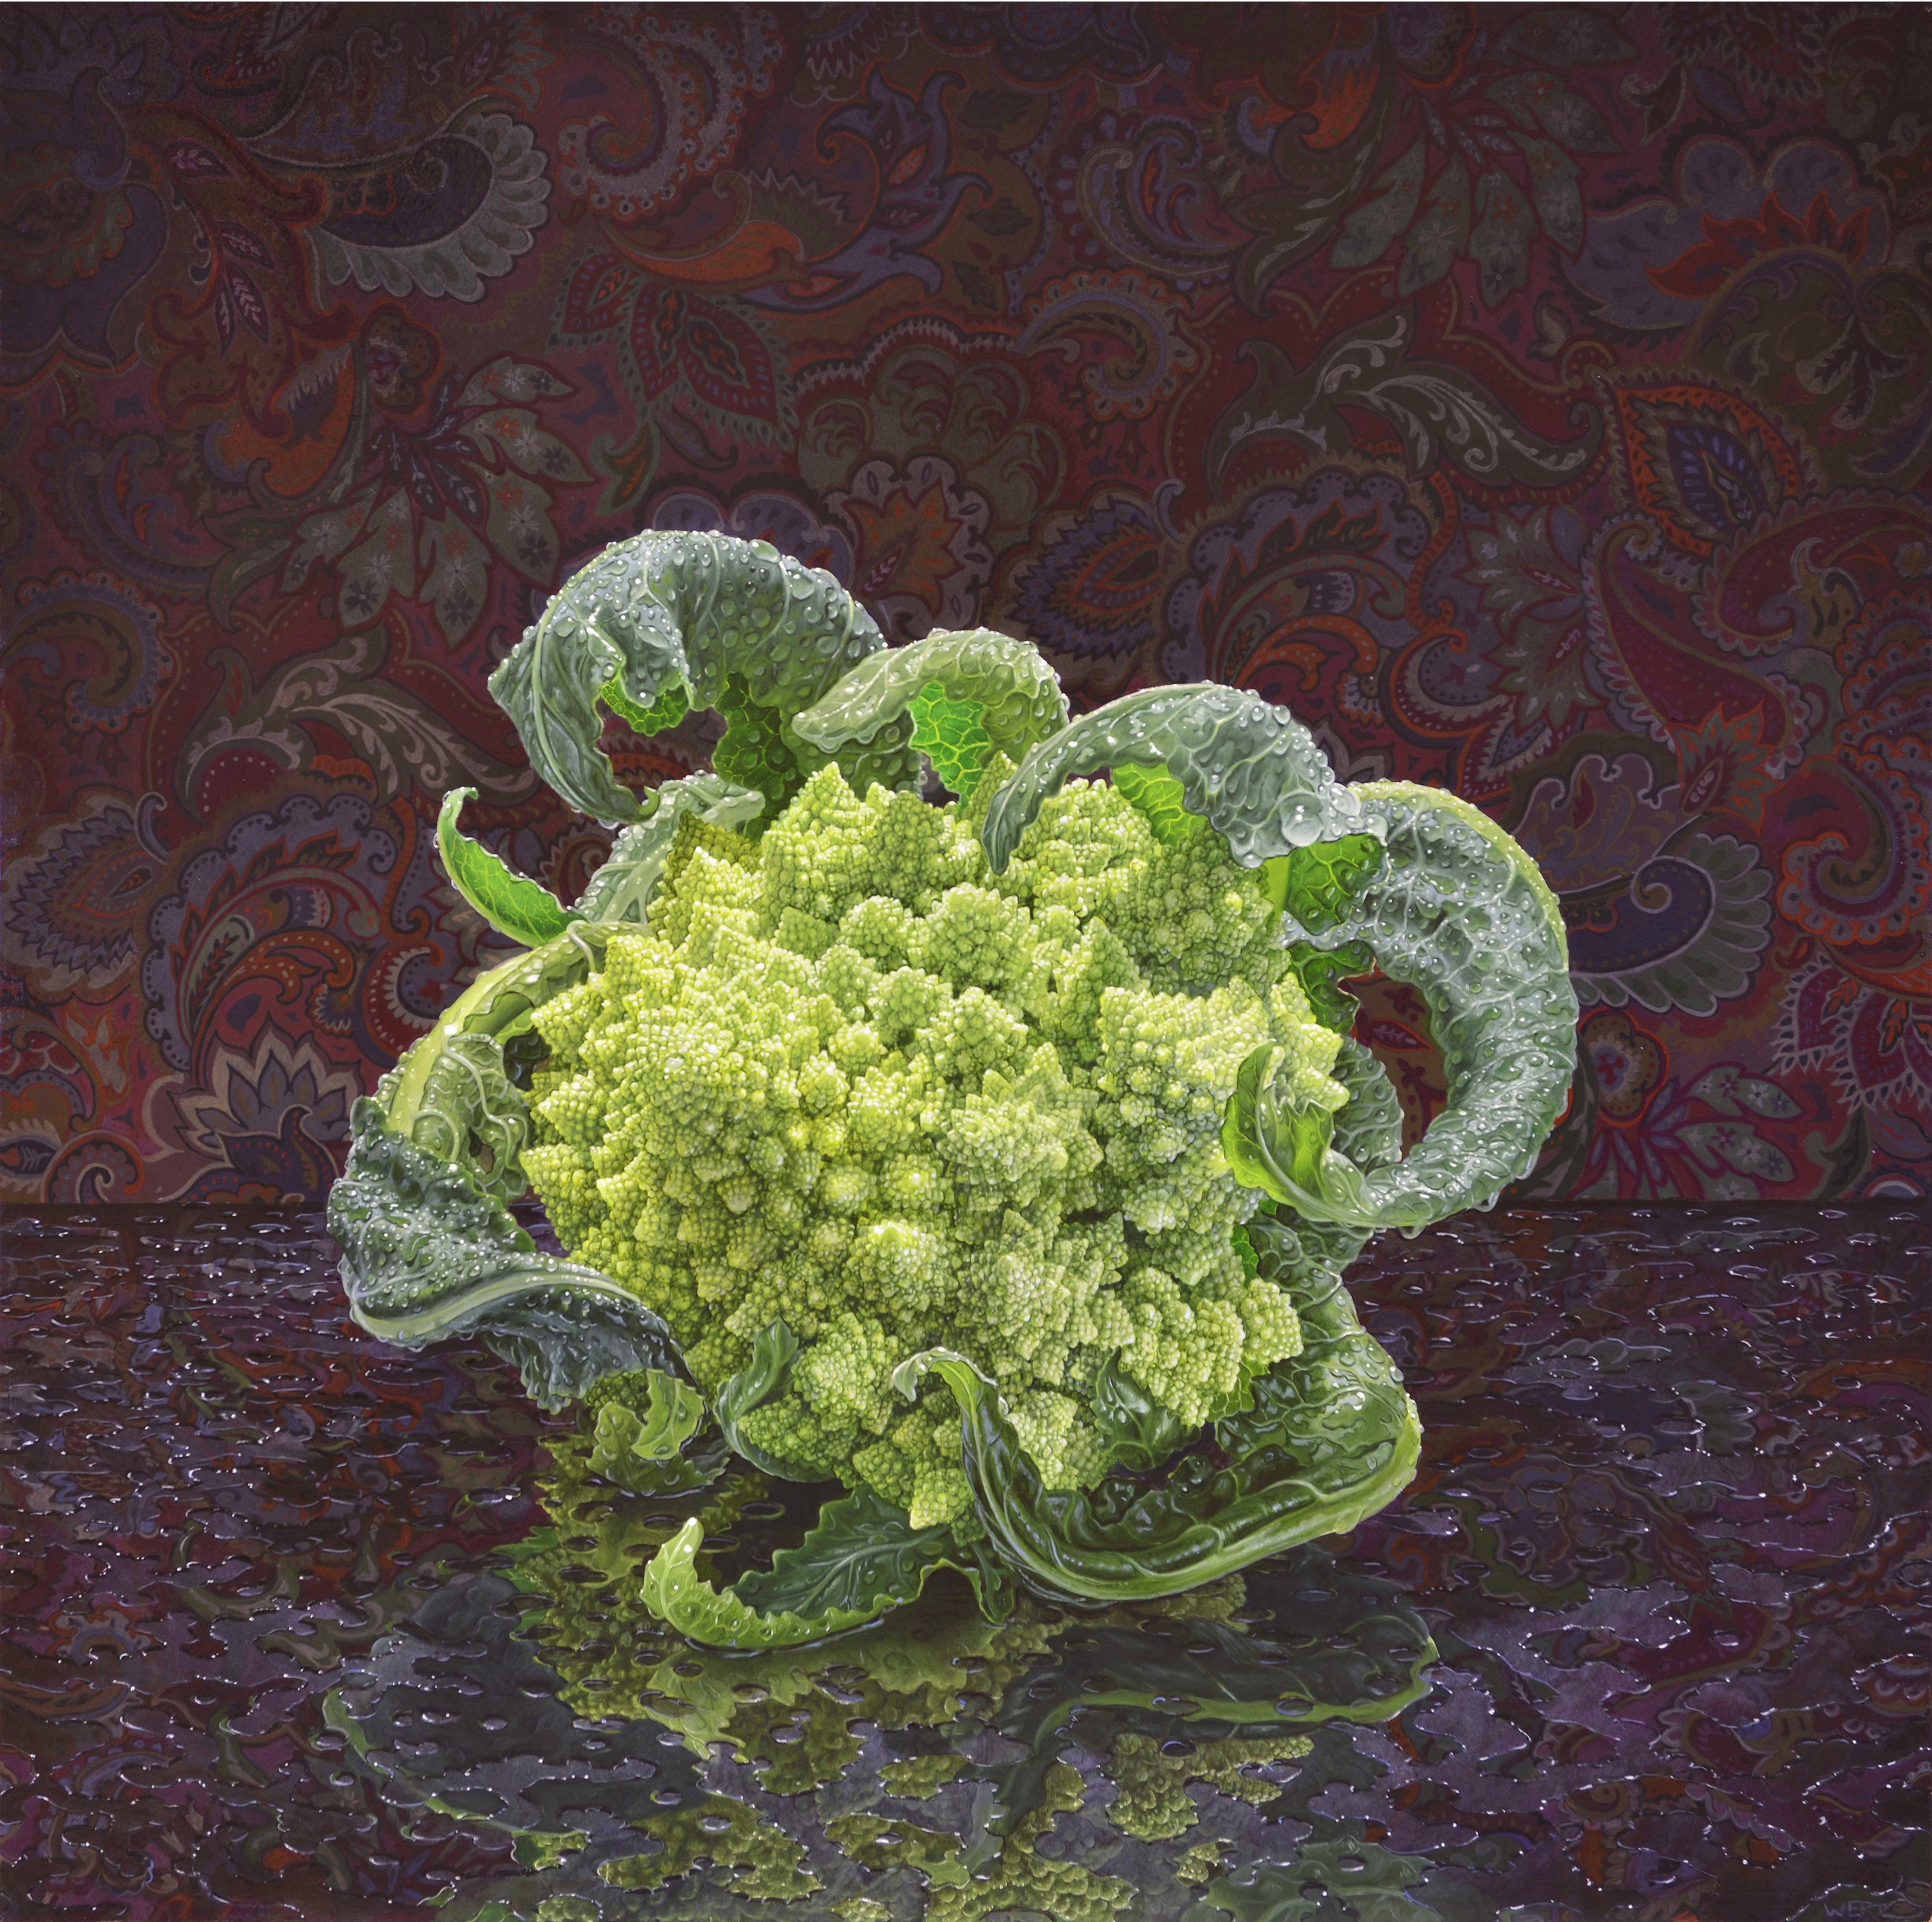 Romanesque, Contemporary Realism, Cauliflower, Tapestry, Reflection - Painting by Eric Wert